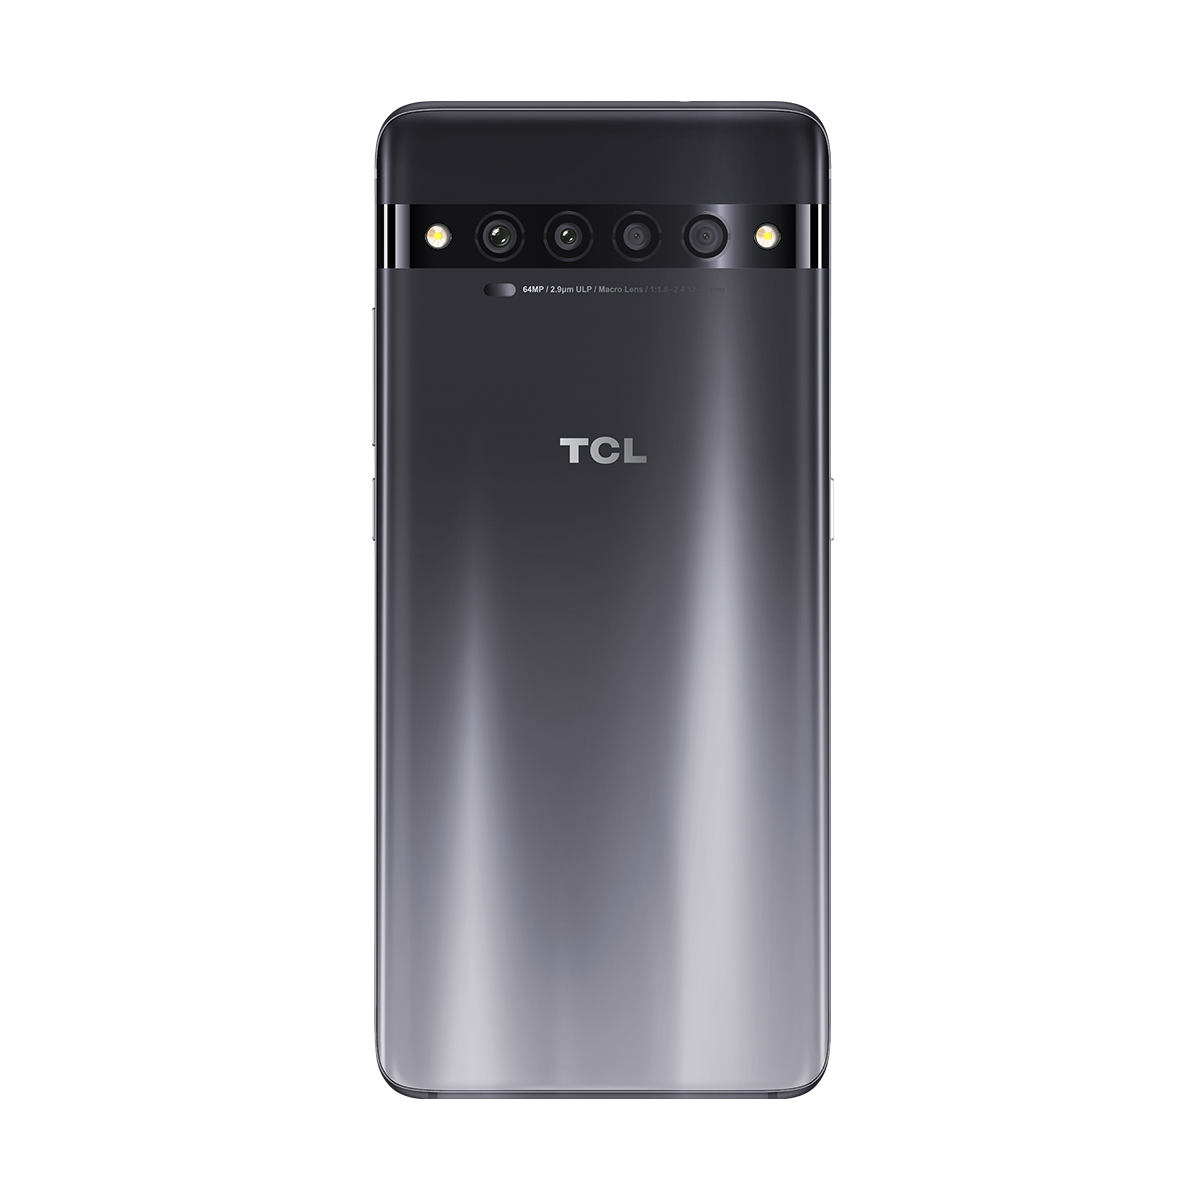 TCL 10 Pro Smartphone with 128GB Memory (Unlocked, Ember Gray) - image 3 of 9